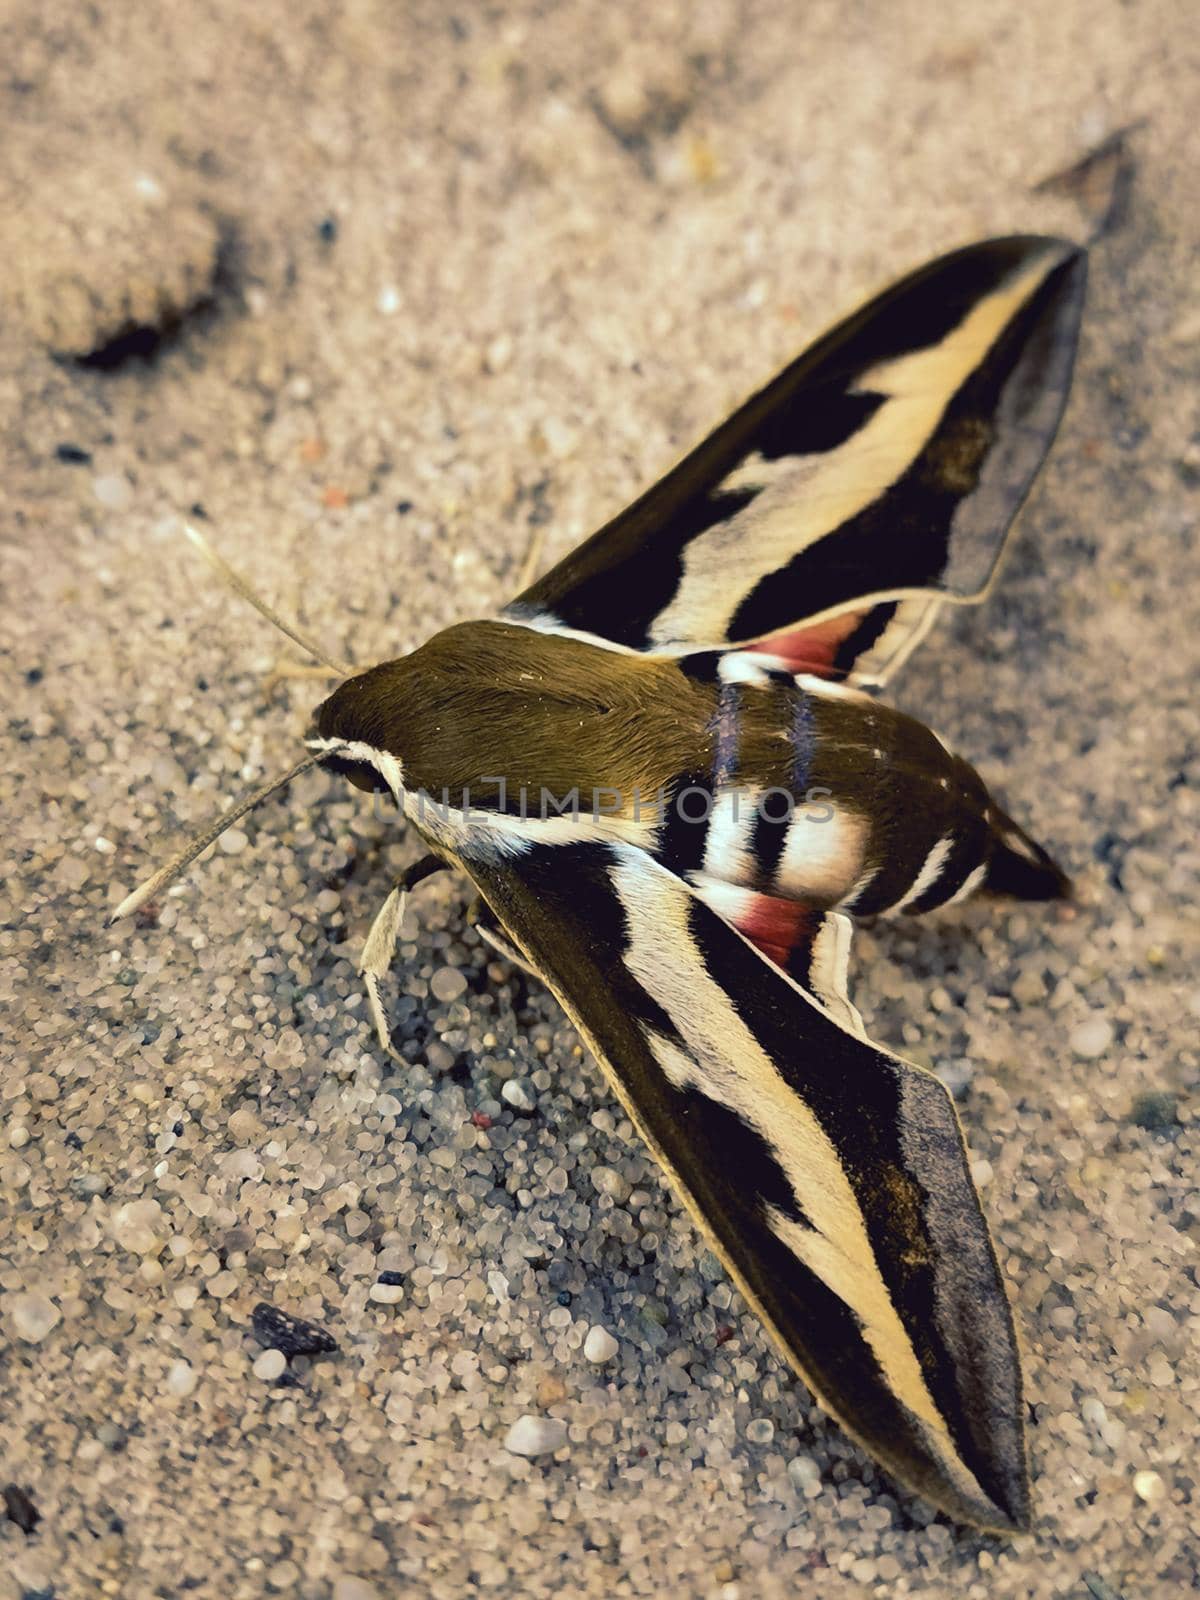 Closeup vertical shot of a beautiful moth butterfly on a sand surface